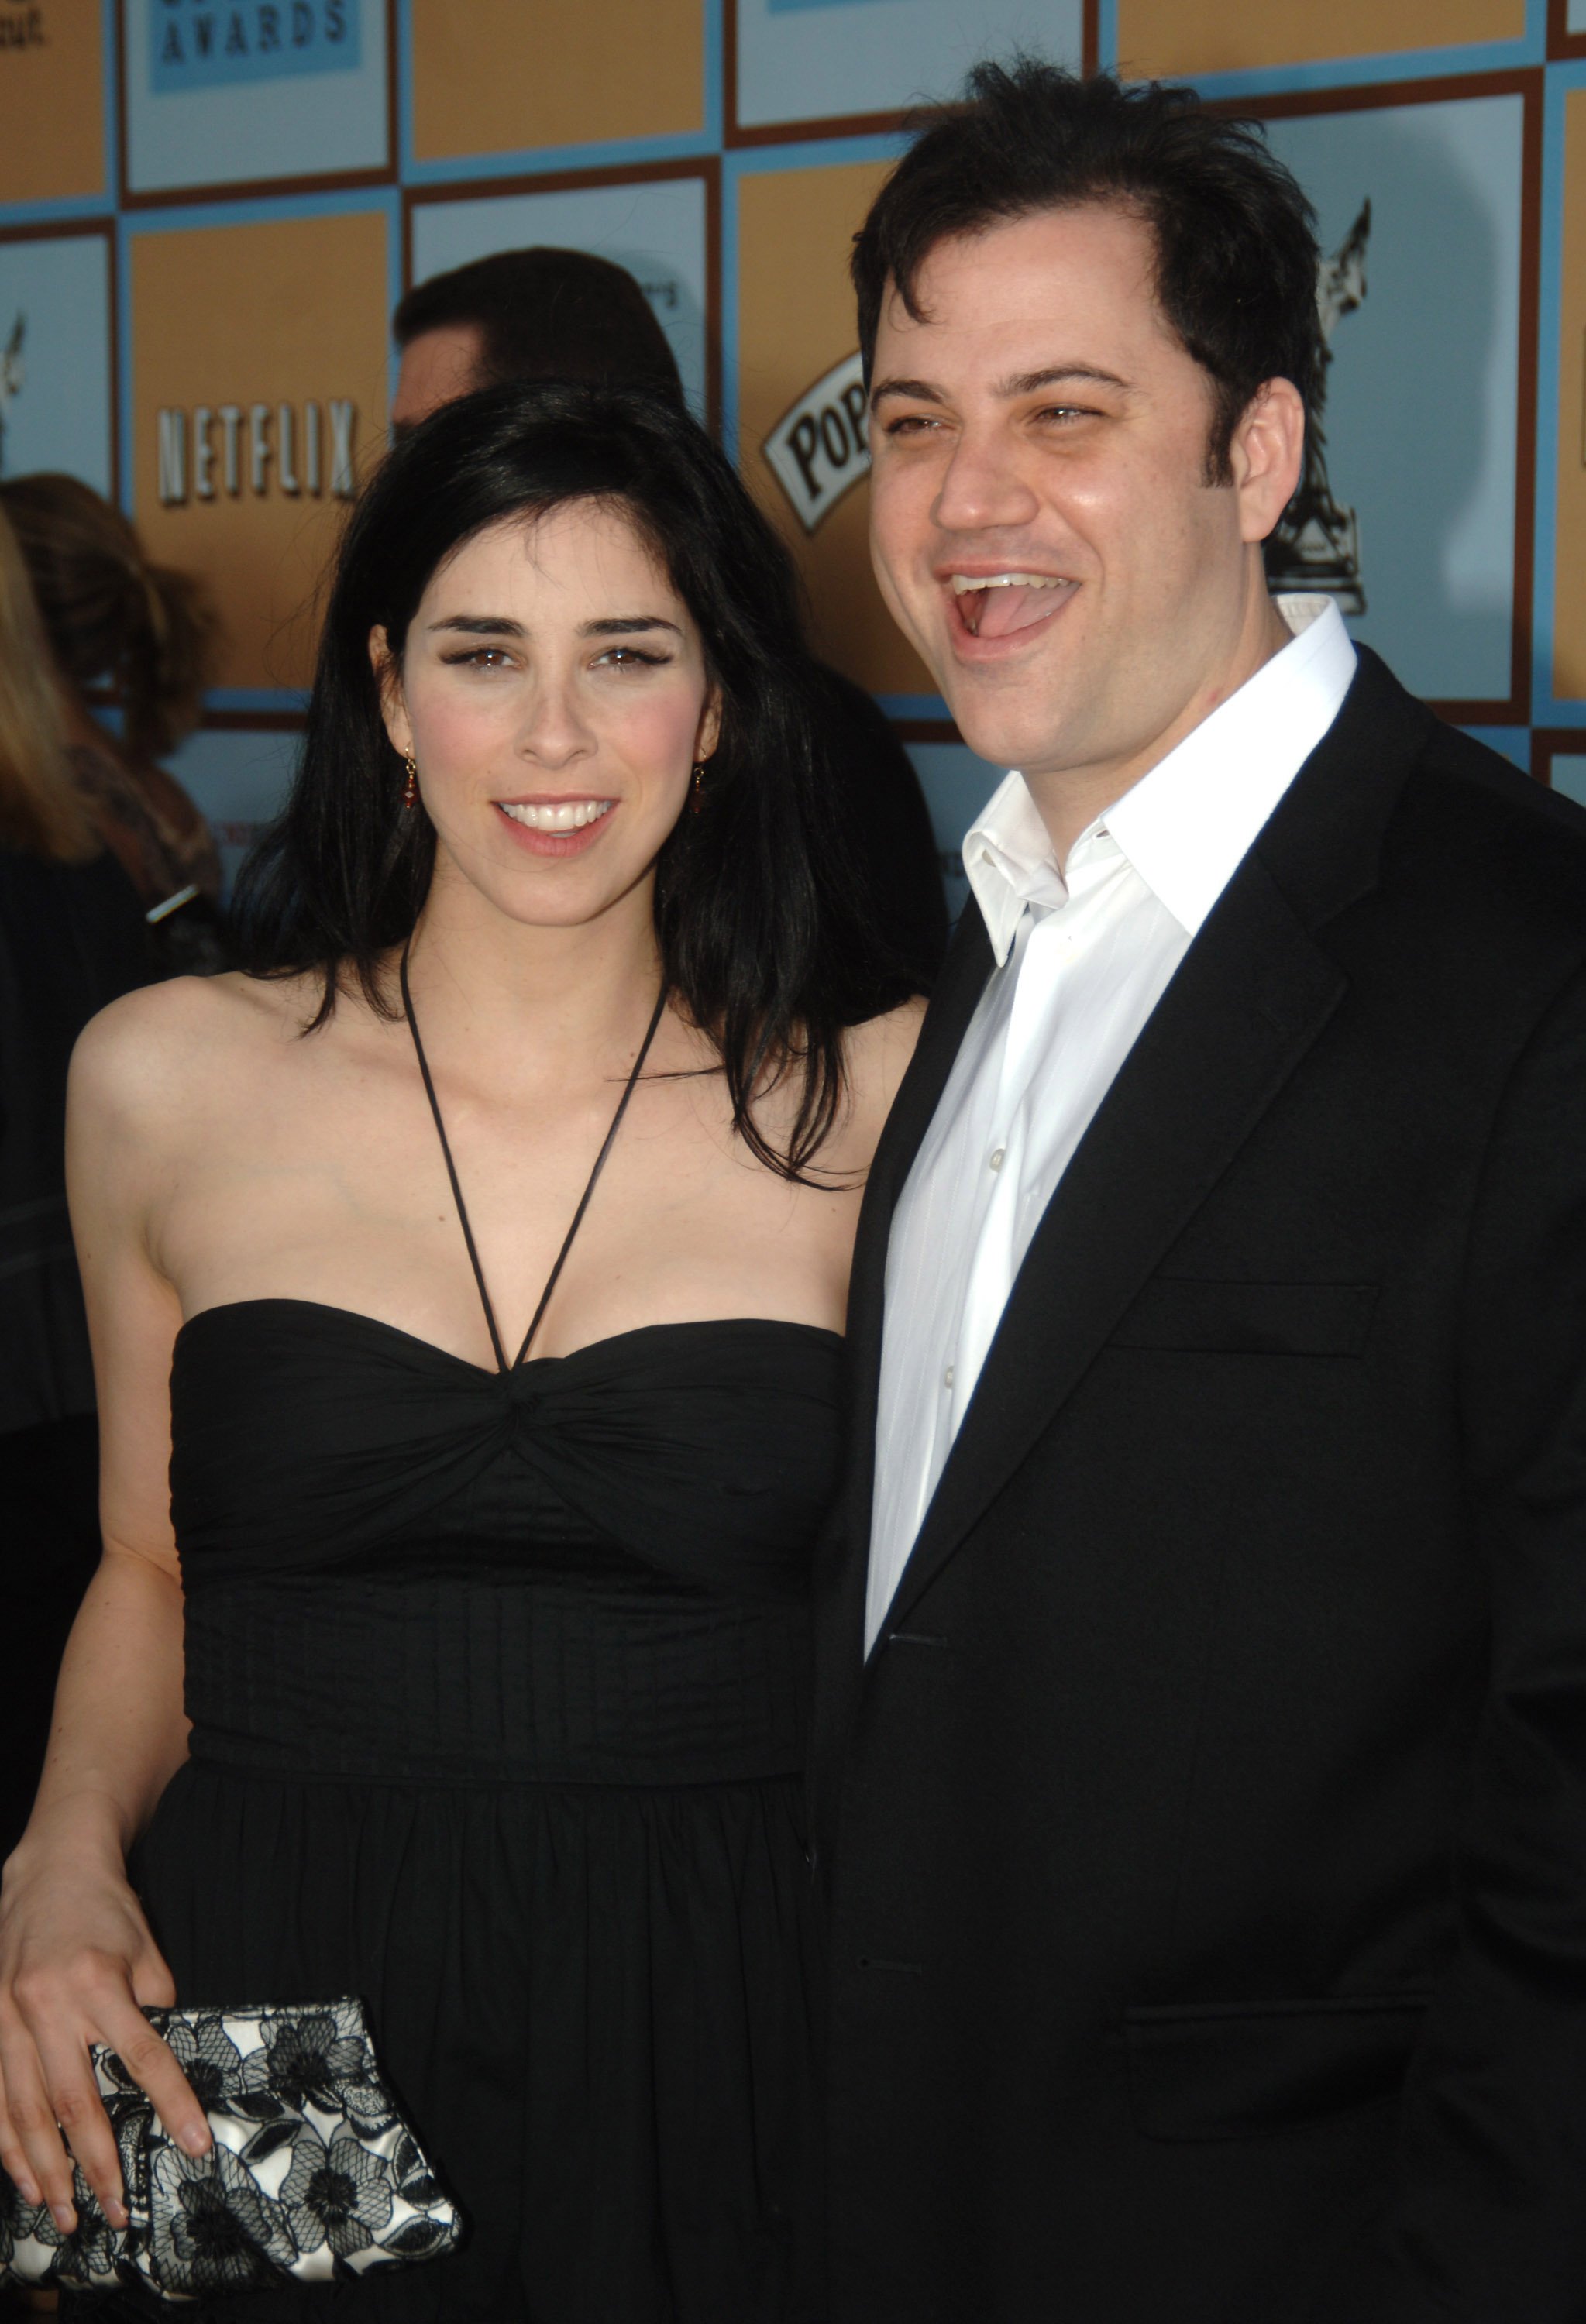 Sarah Silverman and Jimmy Kimmel at the 2006 Independent Spirit Awards on March 4, 2006, in Santa Monica, California. | Source: Getty Images